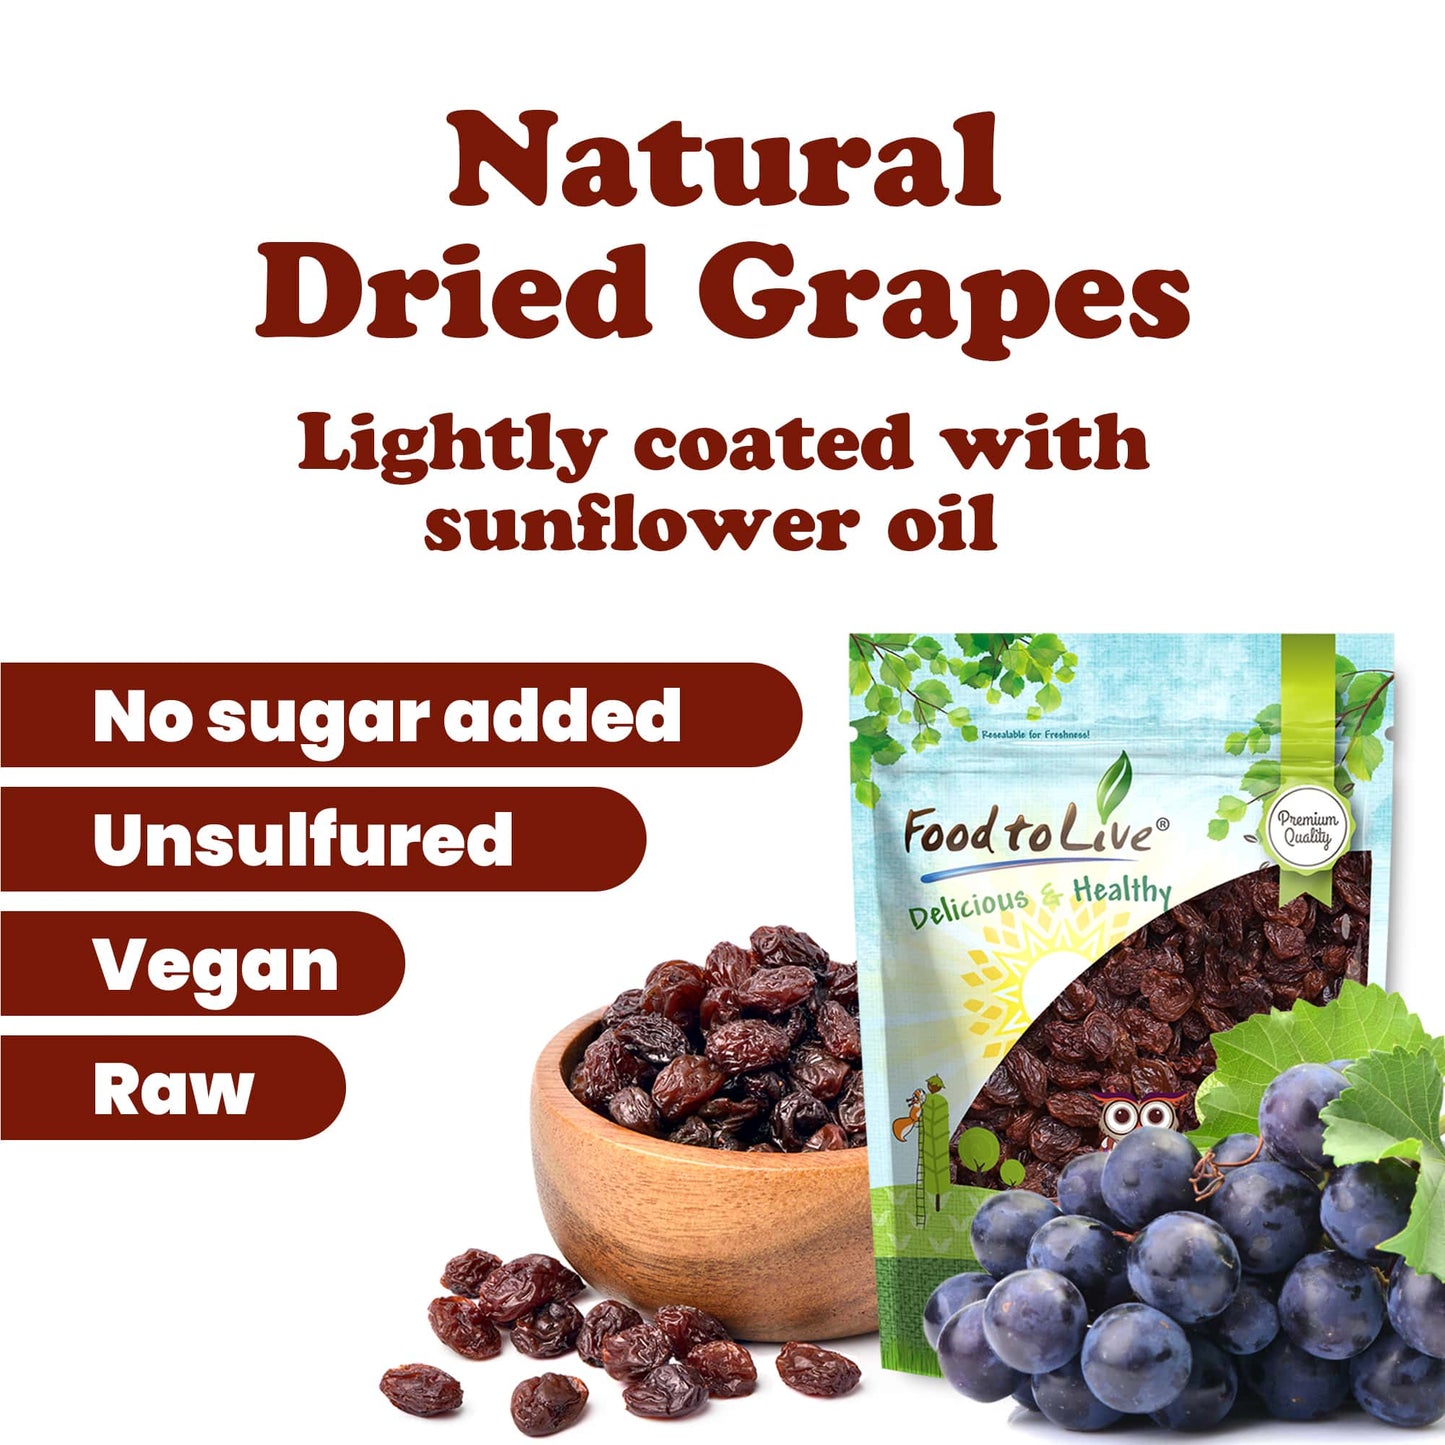 Sultana Raisins – Natural Dried Grapes for Baking, Snacking, and Trail Mixes. No Sugar Added, Unsulfured, Lightly Coated with Sunflower Oil. Perfect Pantry Staple. Paleo Fruit in Bulk